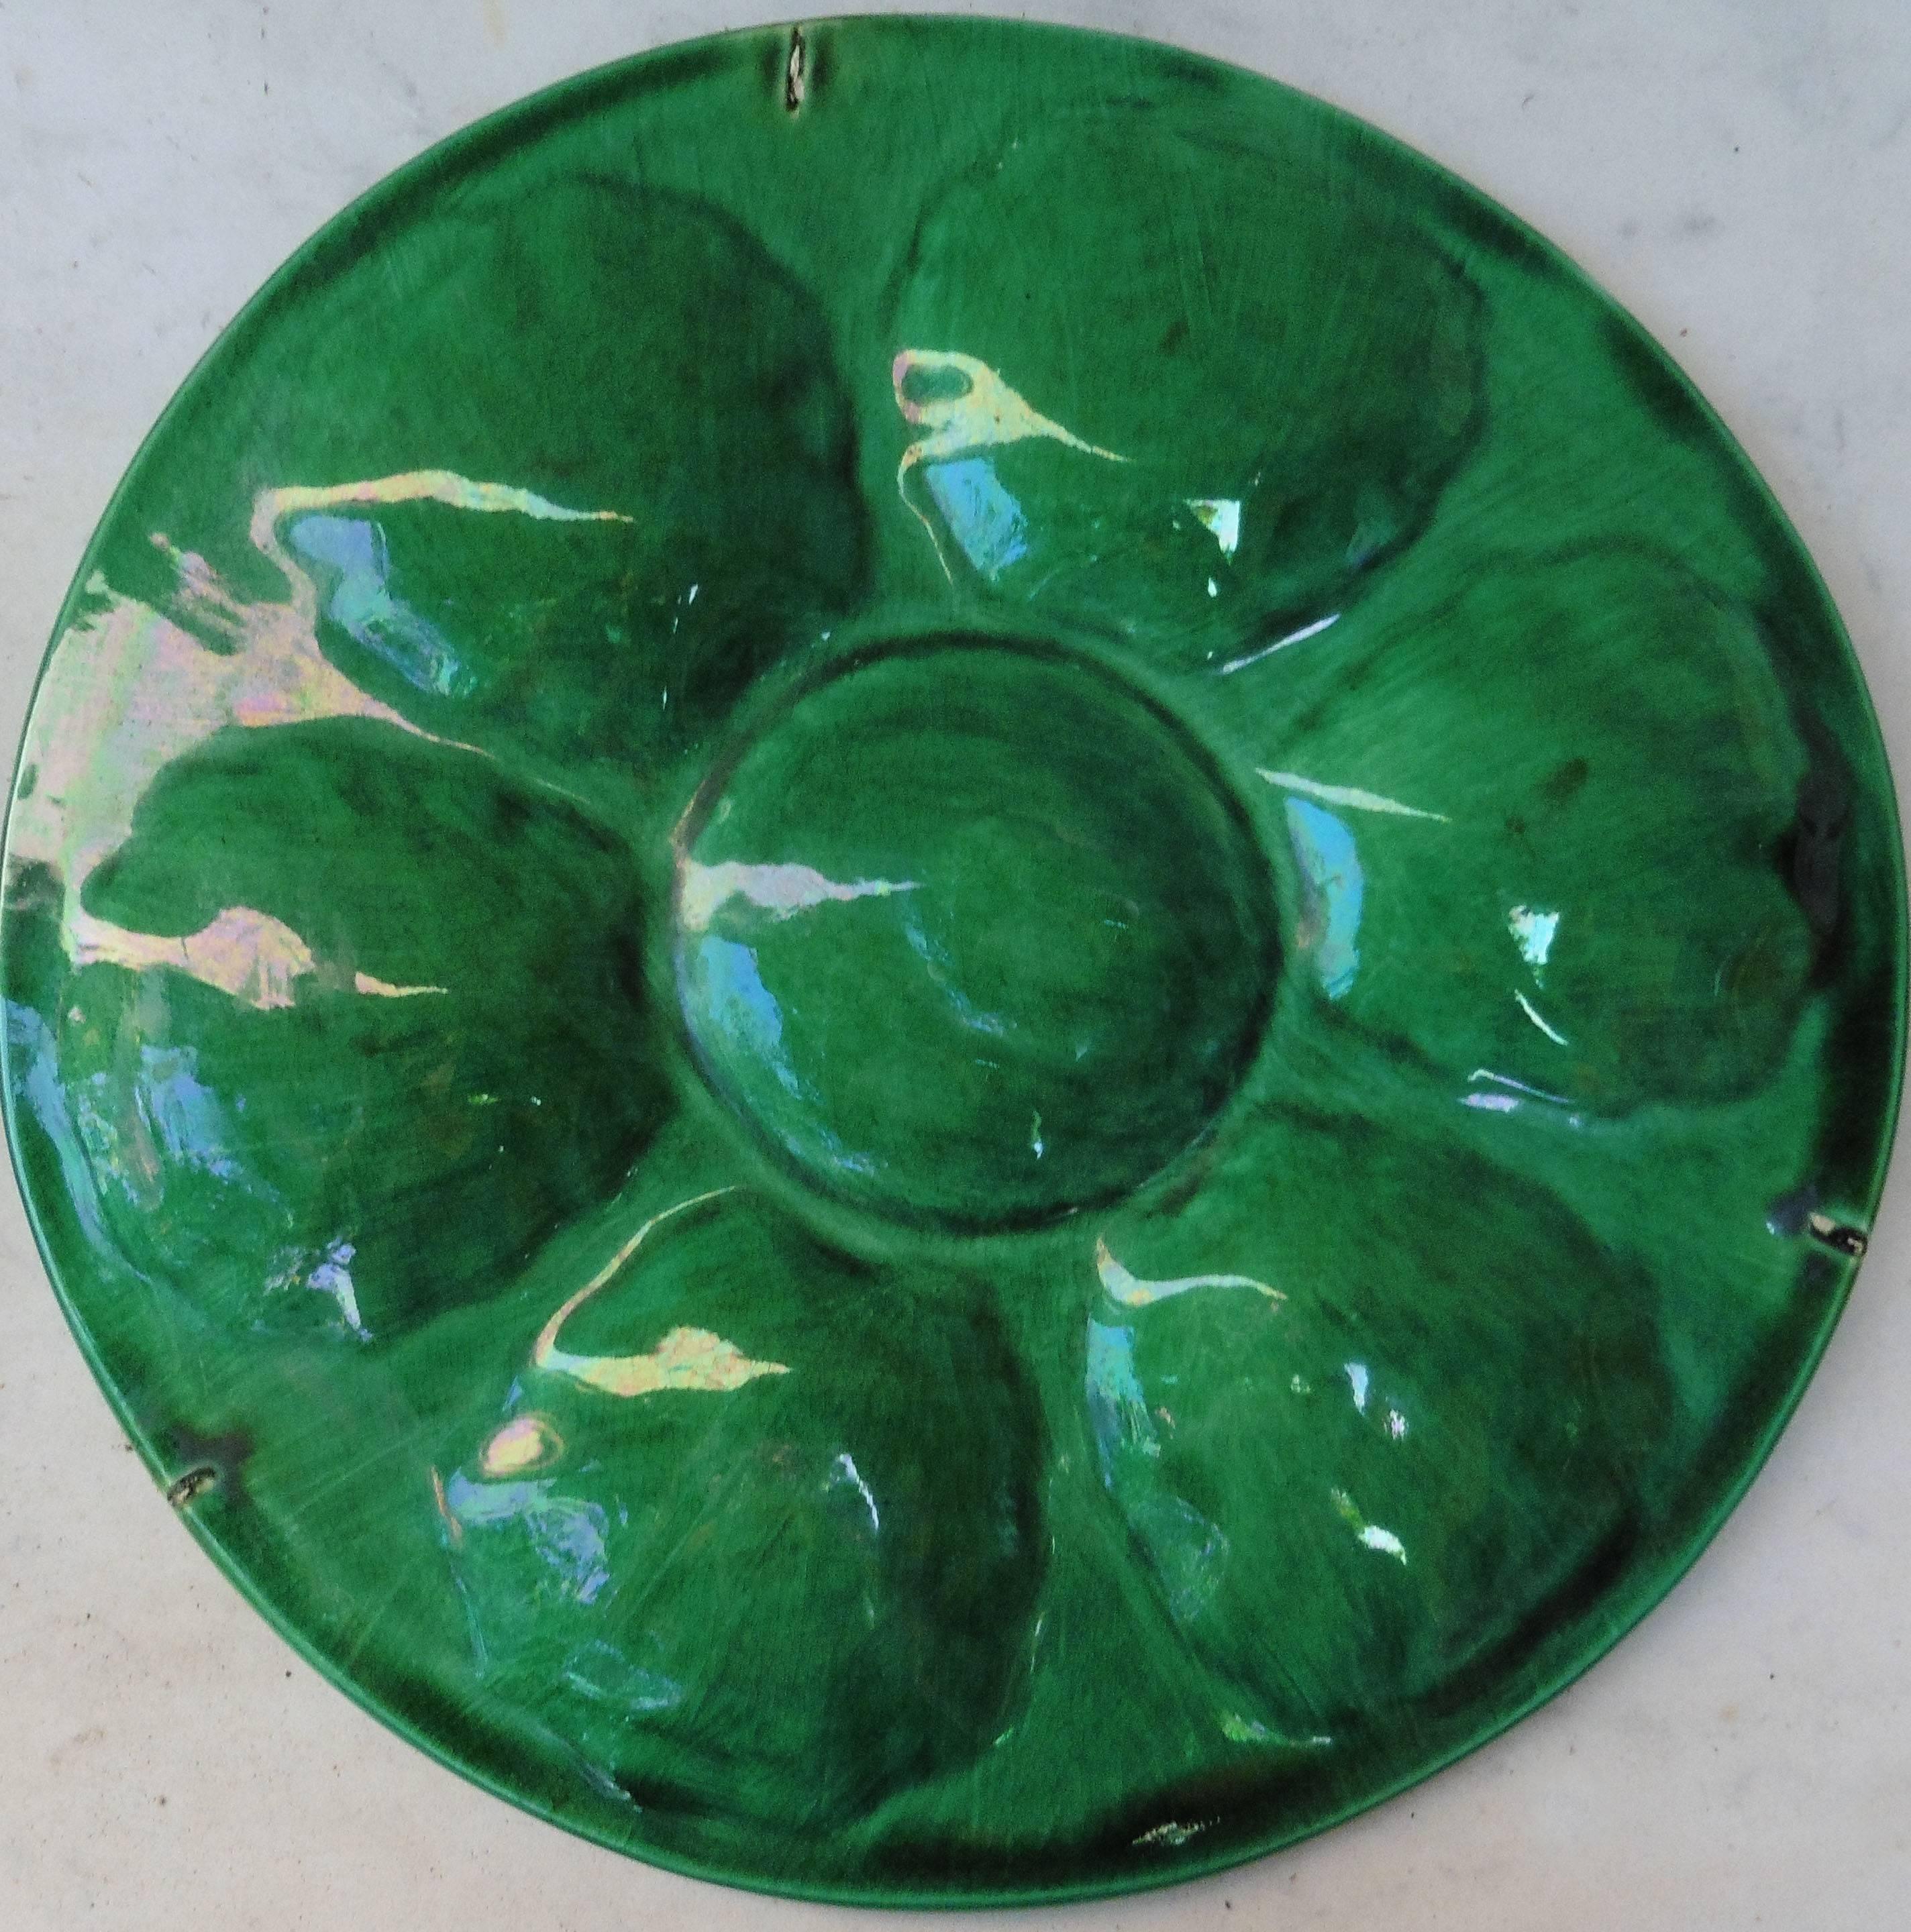 Green Majolica oyster plate with seaweeds signed Salins (East of France) circa 1890.